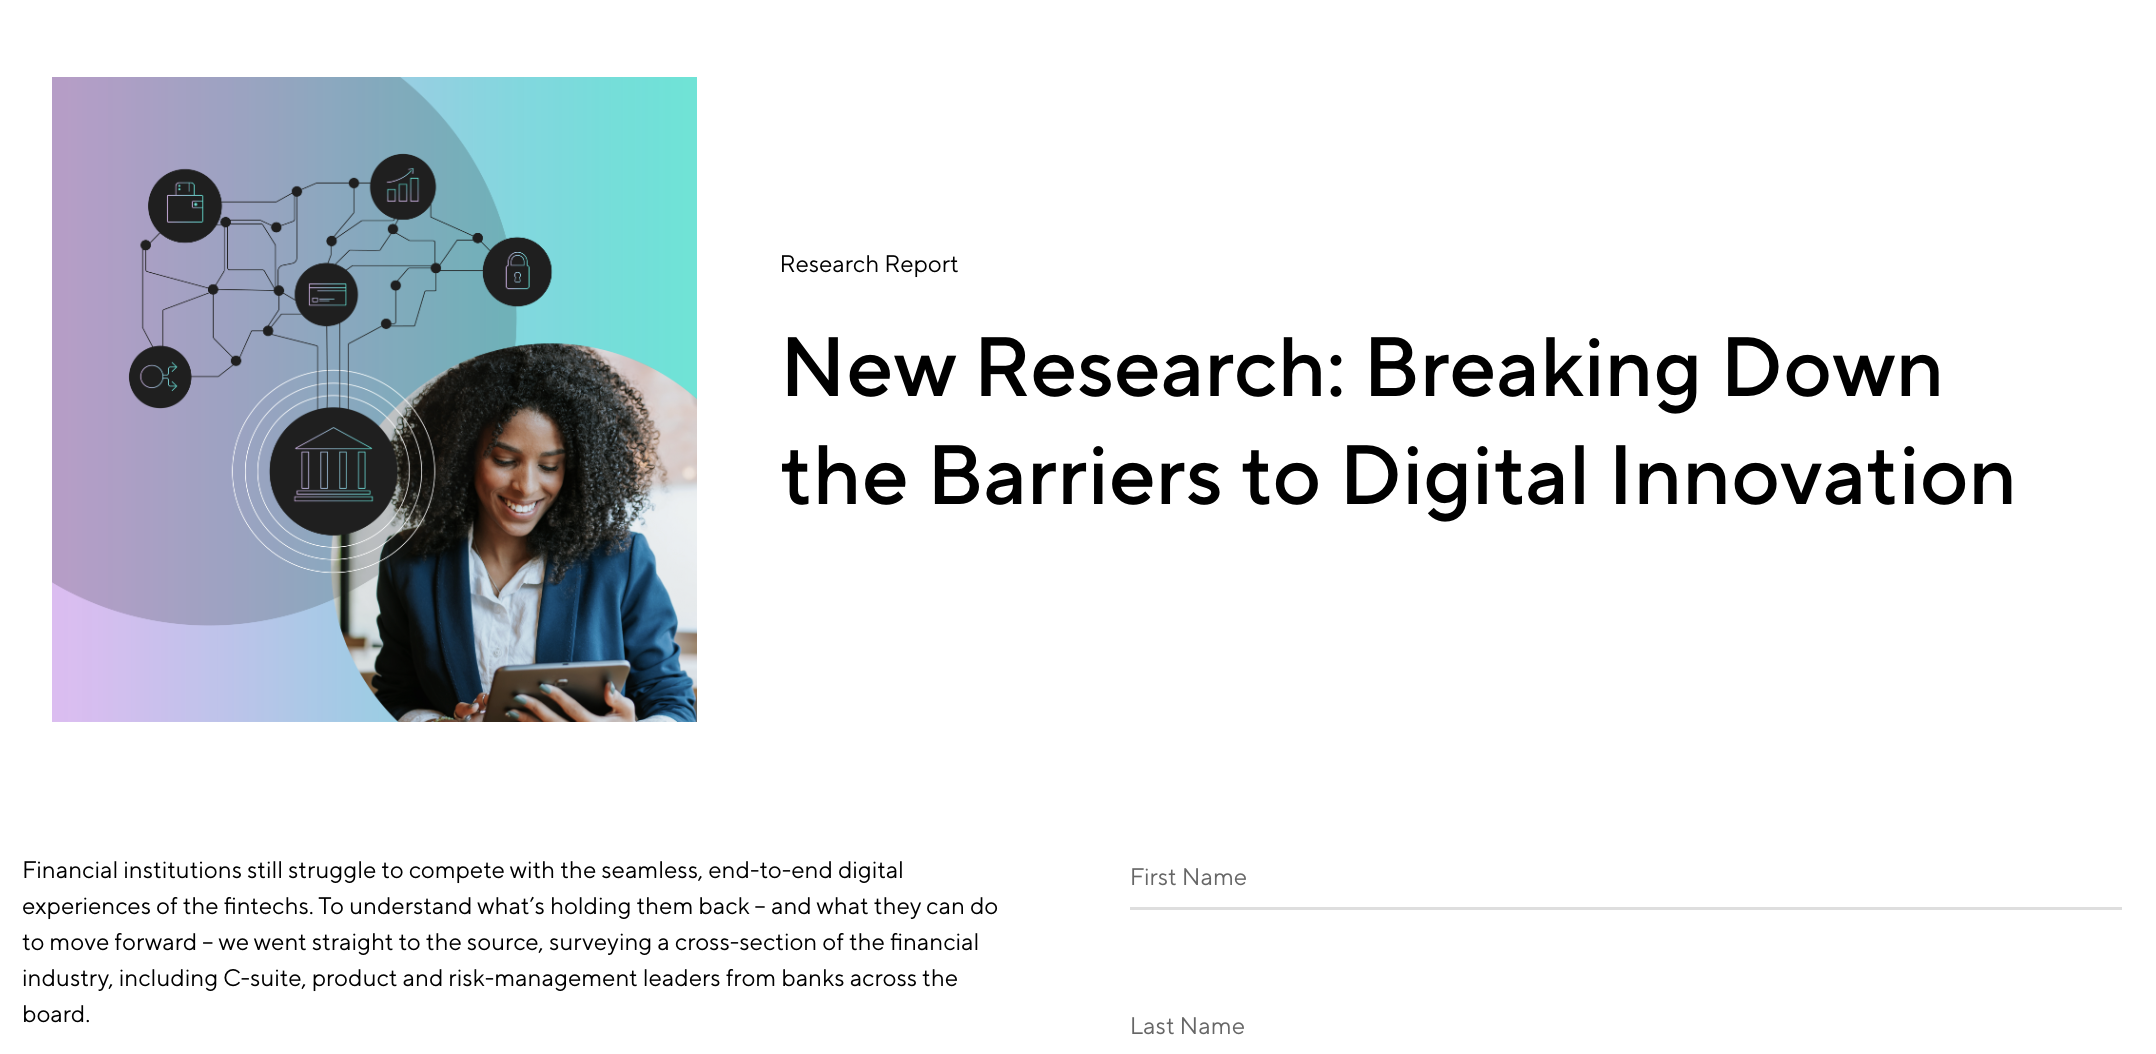 New Research: Breaking Down the Barriers to Digital Innovation